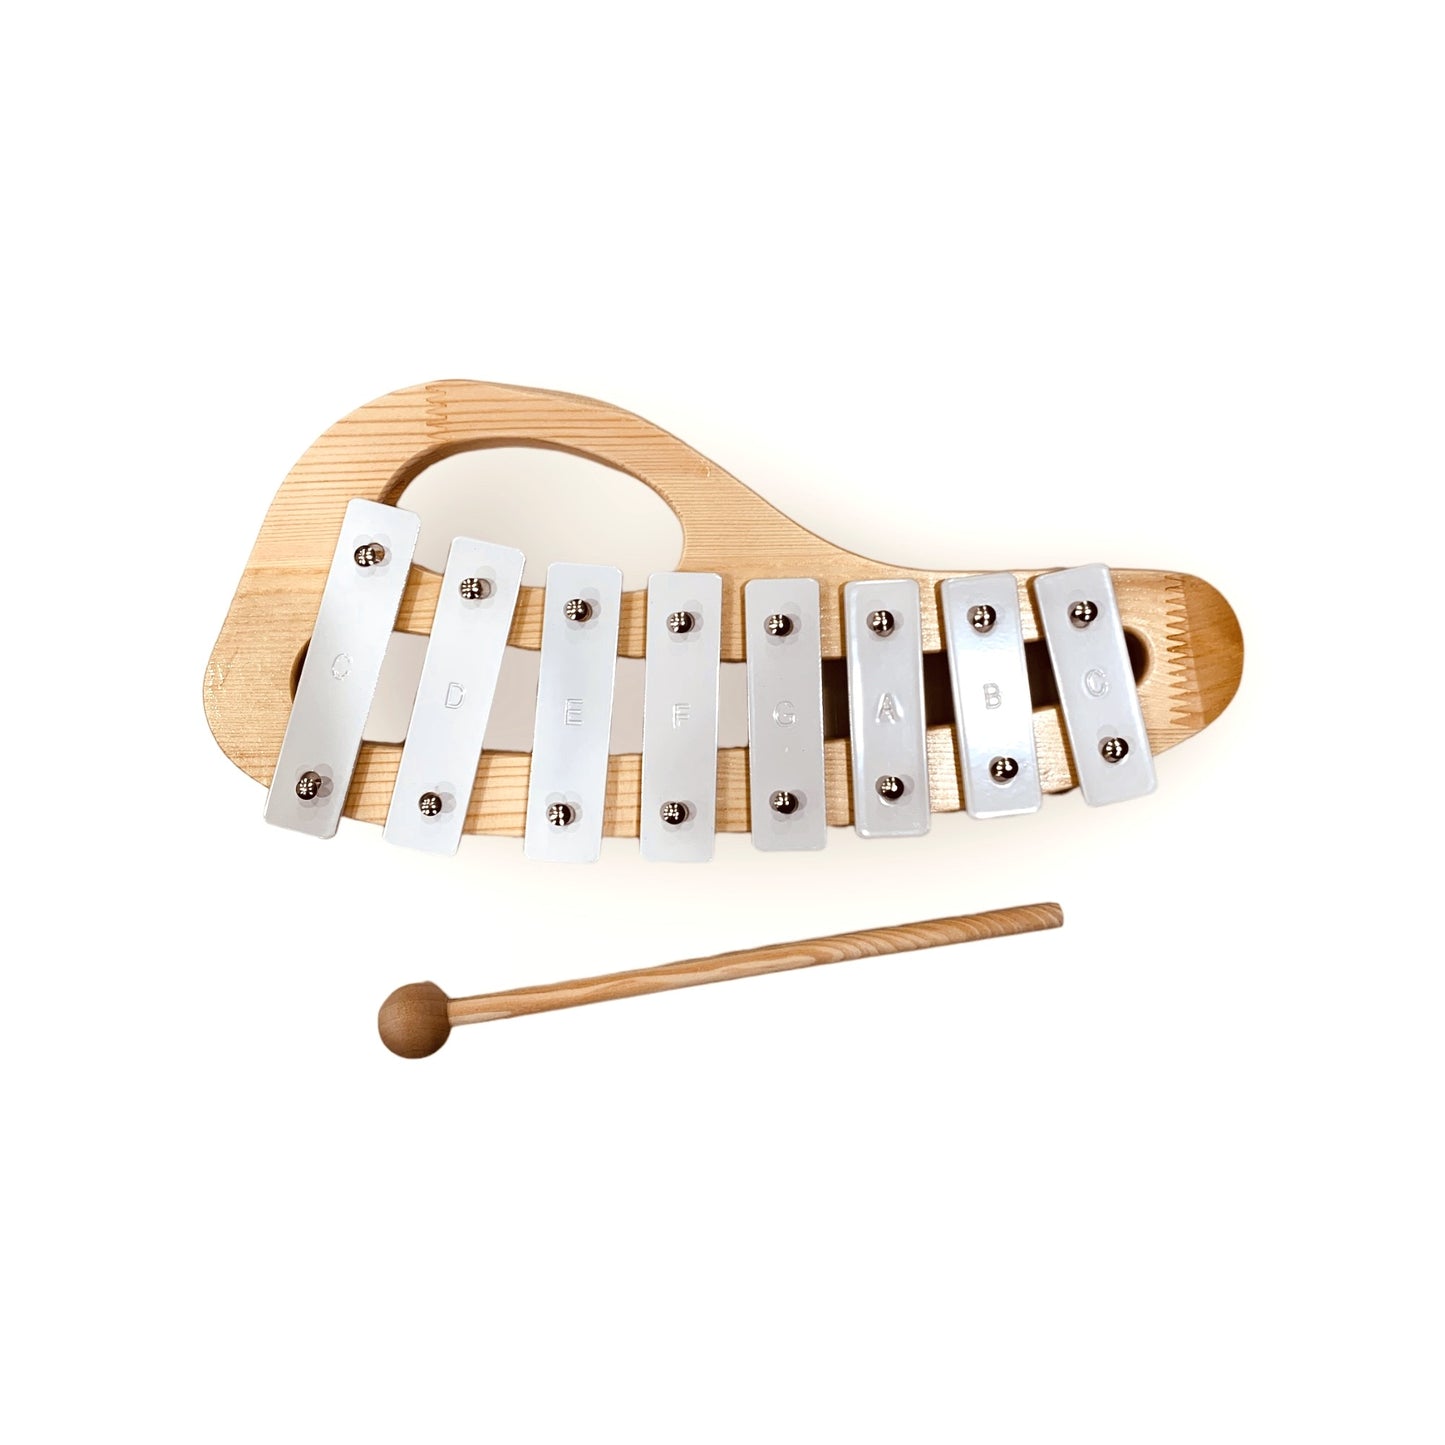 musical instrument wooden toys for kids